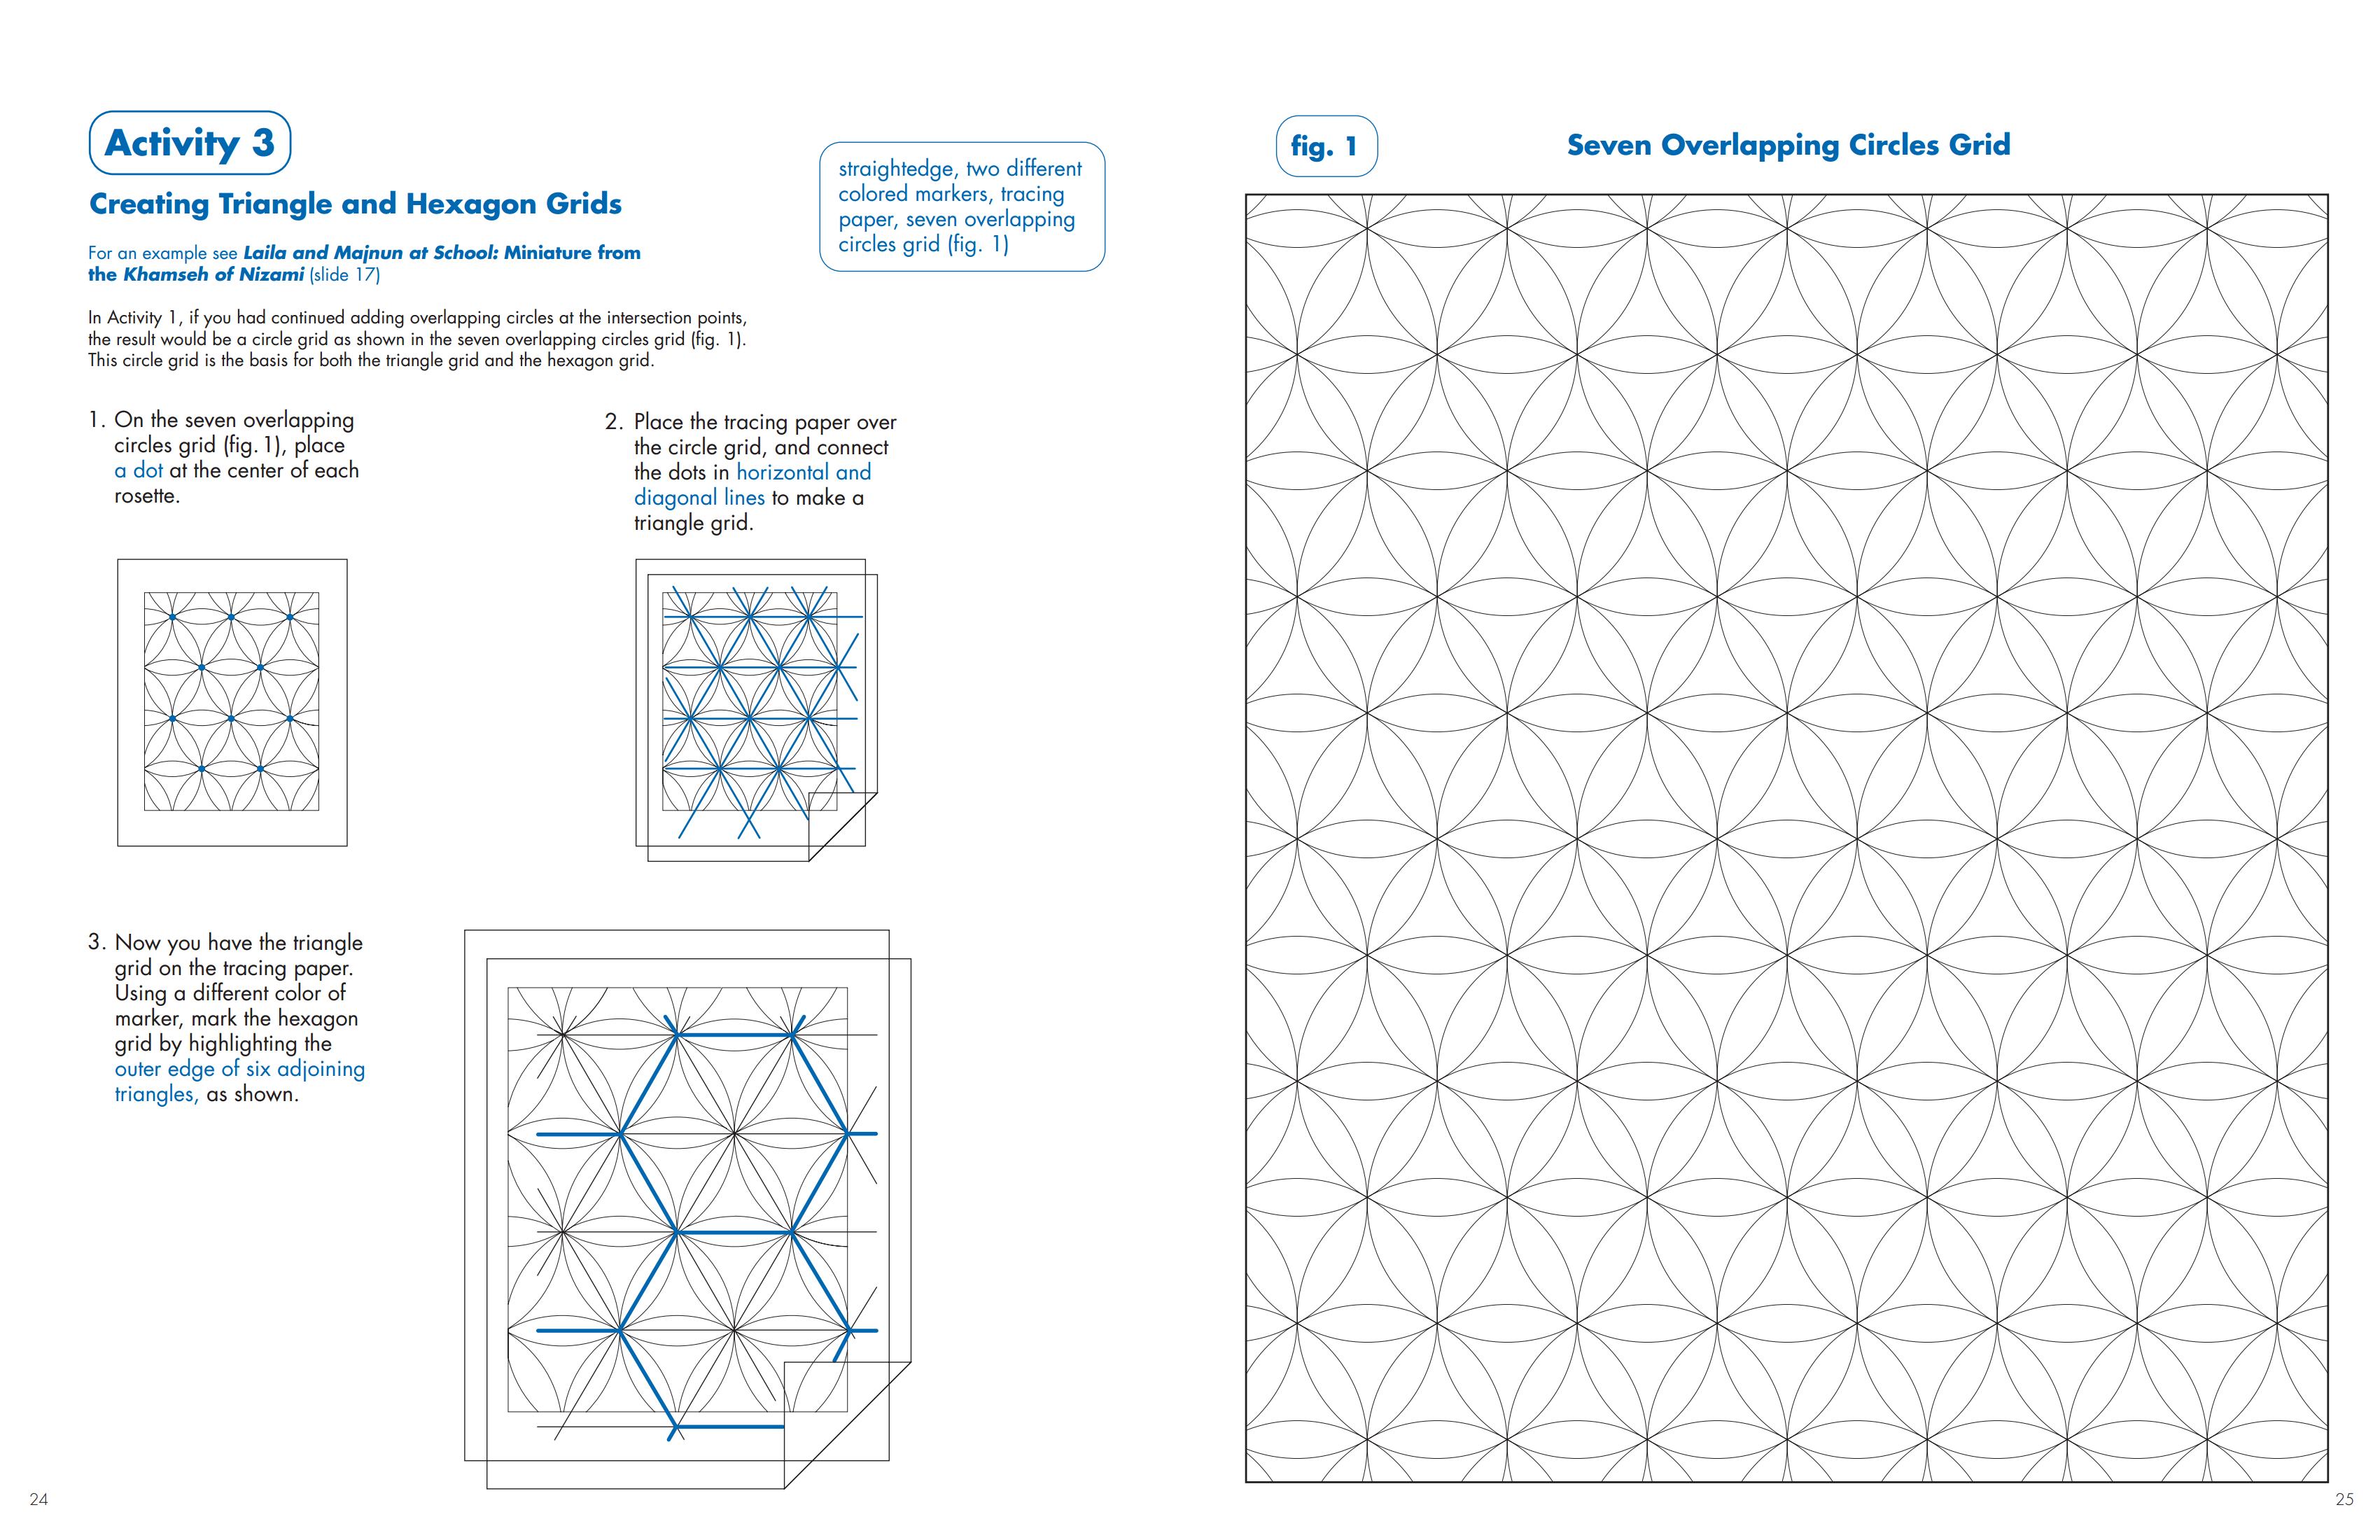 Islamic Art and Geometric Design : Activities for Learning. — New York : The Metropolitan Museum of Art, 2004